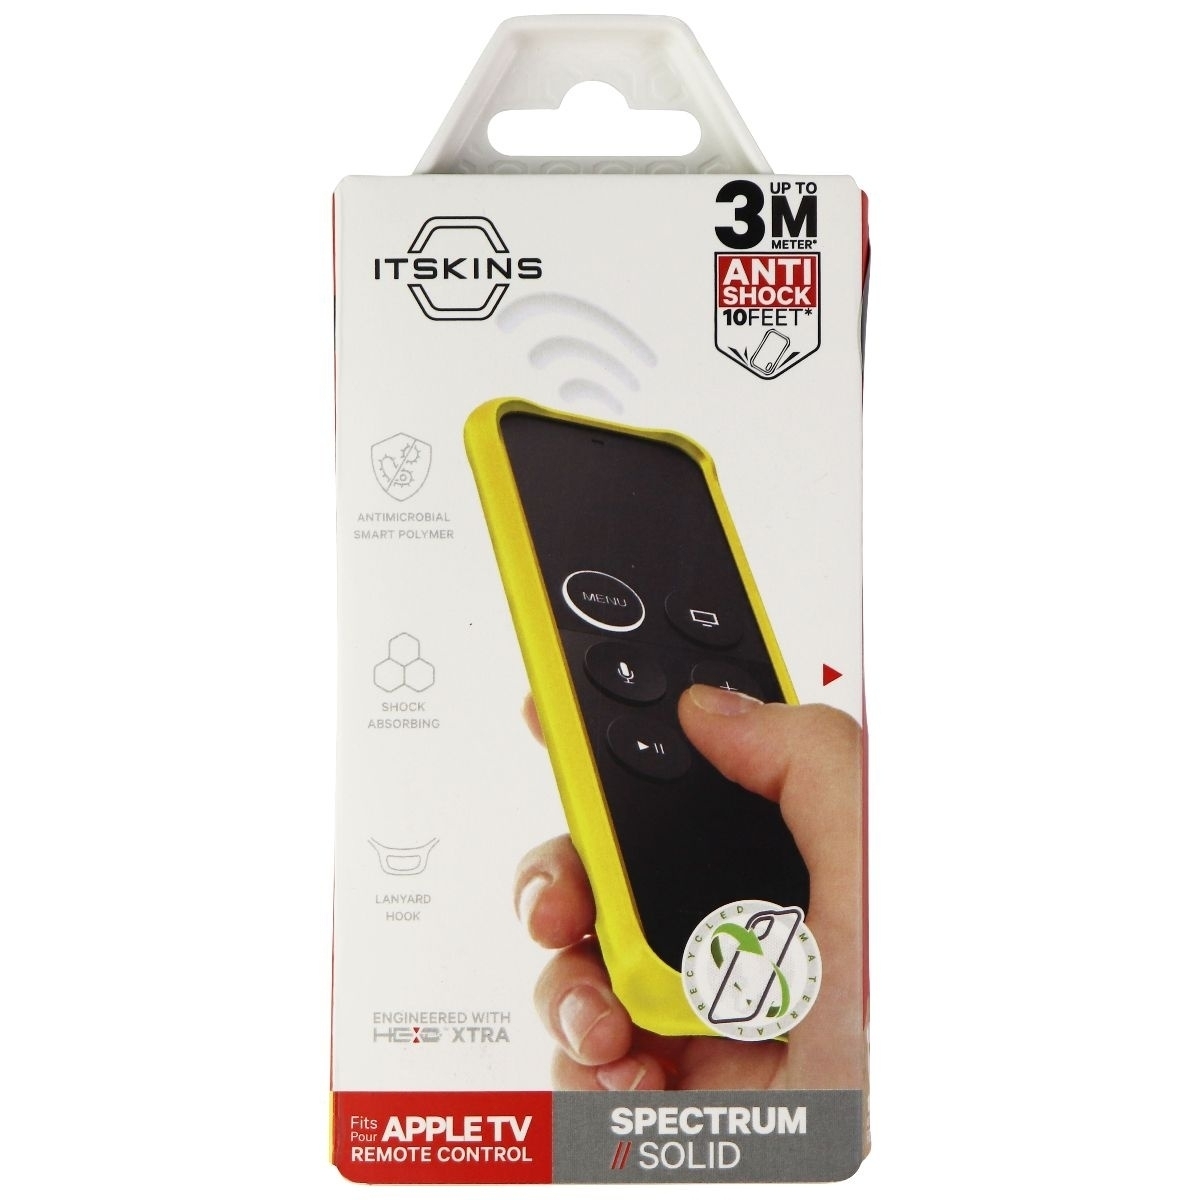 ITSKINS Spectrum Solid Cover For Apple TV Remote Control - Yellow